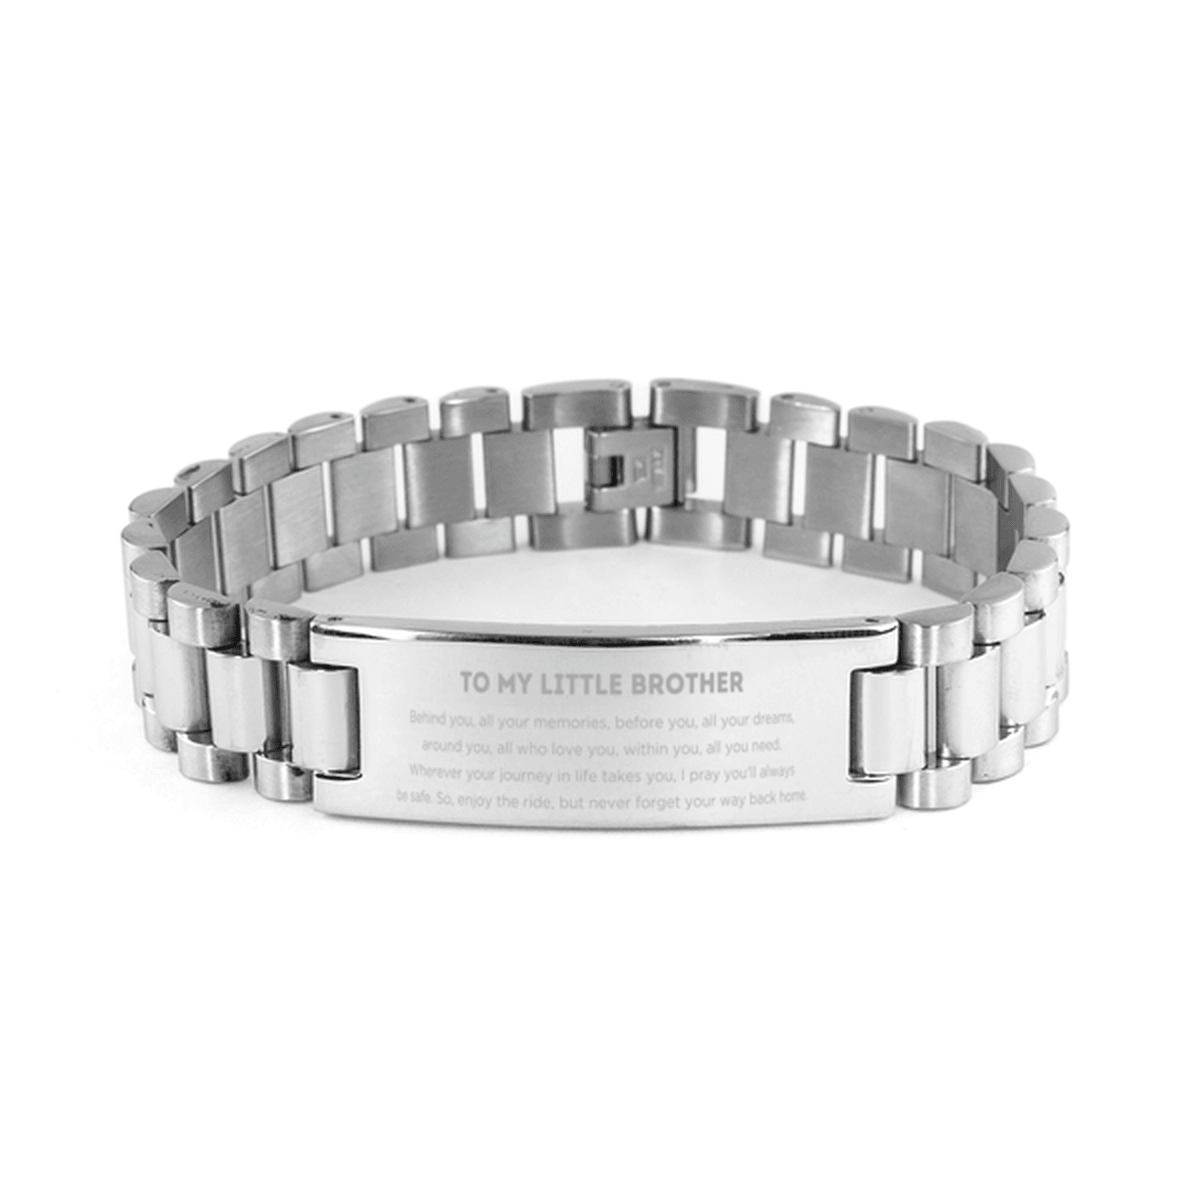 To My Little Brother Gifts, Inspirational Little Brother Ladder Stainless Steel Bracelet, Sentimental Birthday Christmas Unique Gifts For Little Brother Behind you, all your memories, before you, all your dreams, around you, all who love you, within you, - Mallard Moon Gift Shop